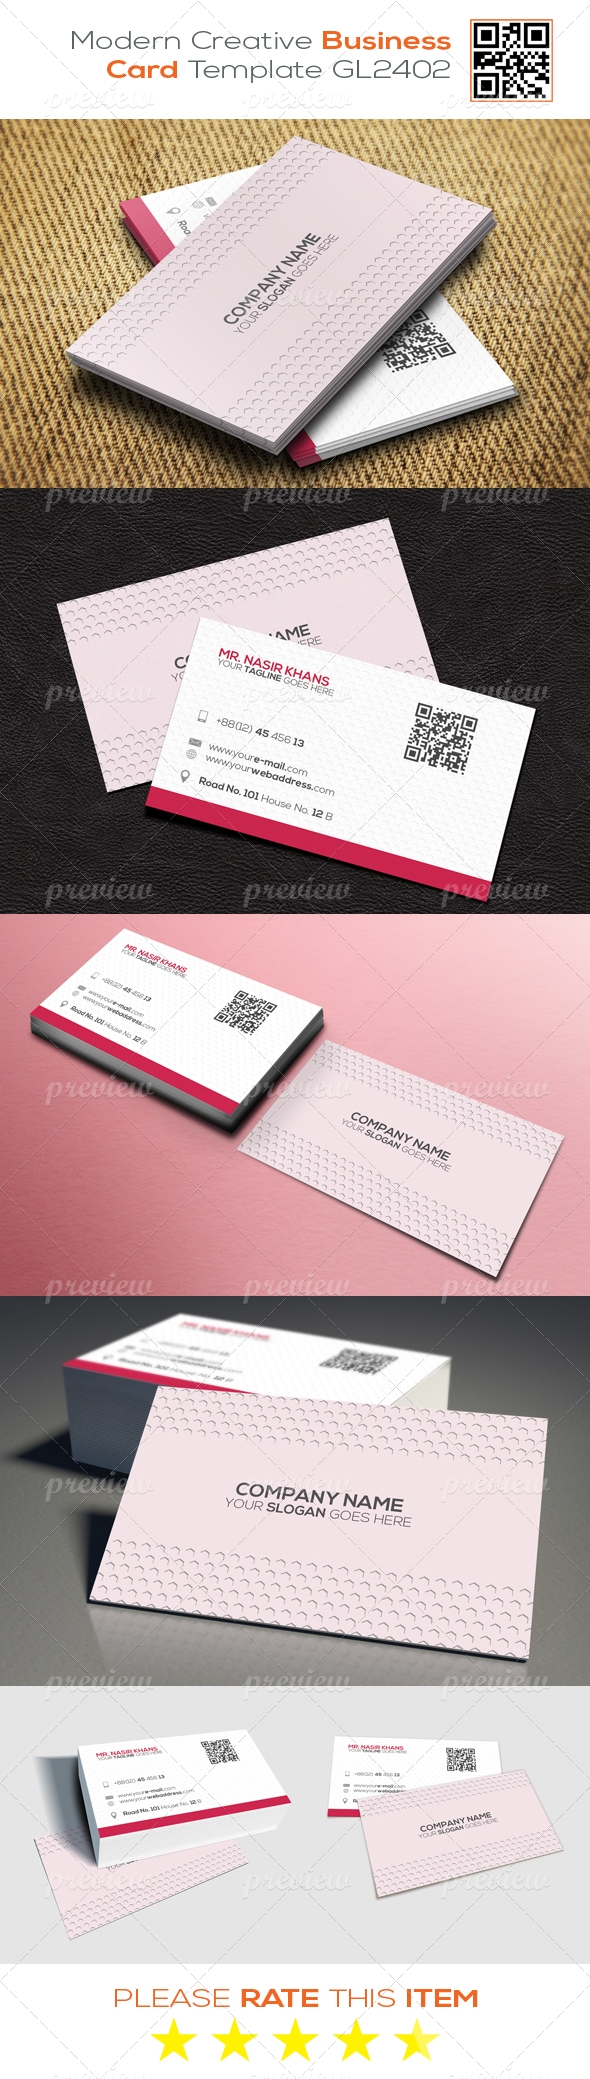 Normal Business Card Template GL2402